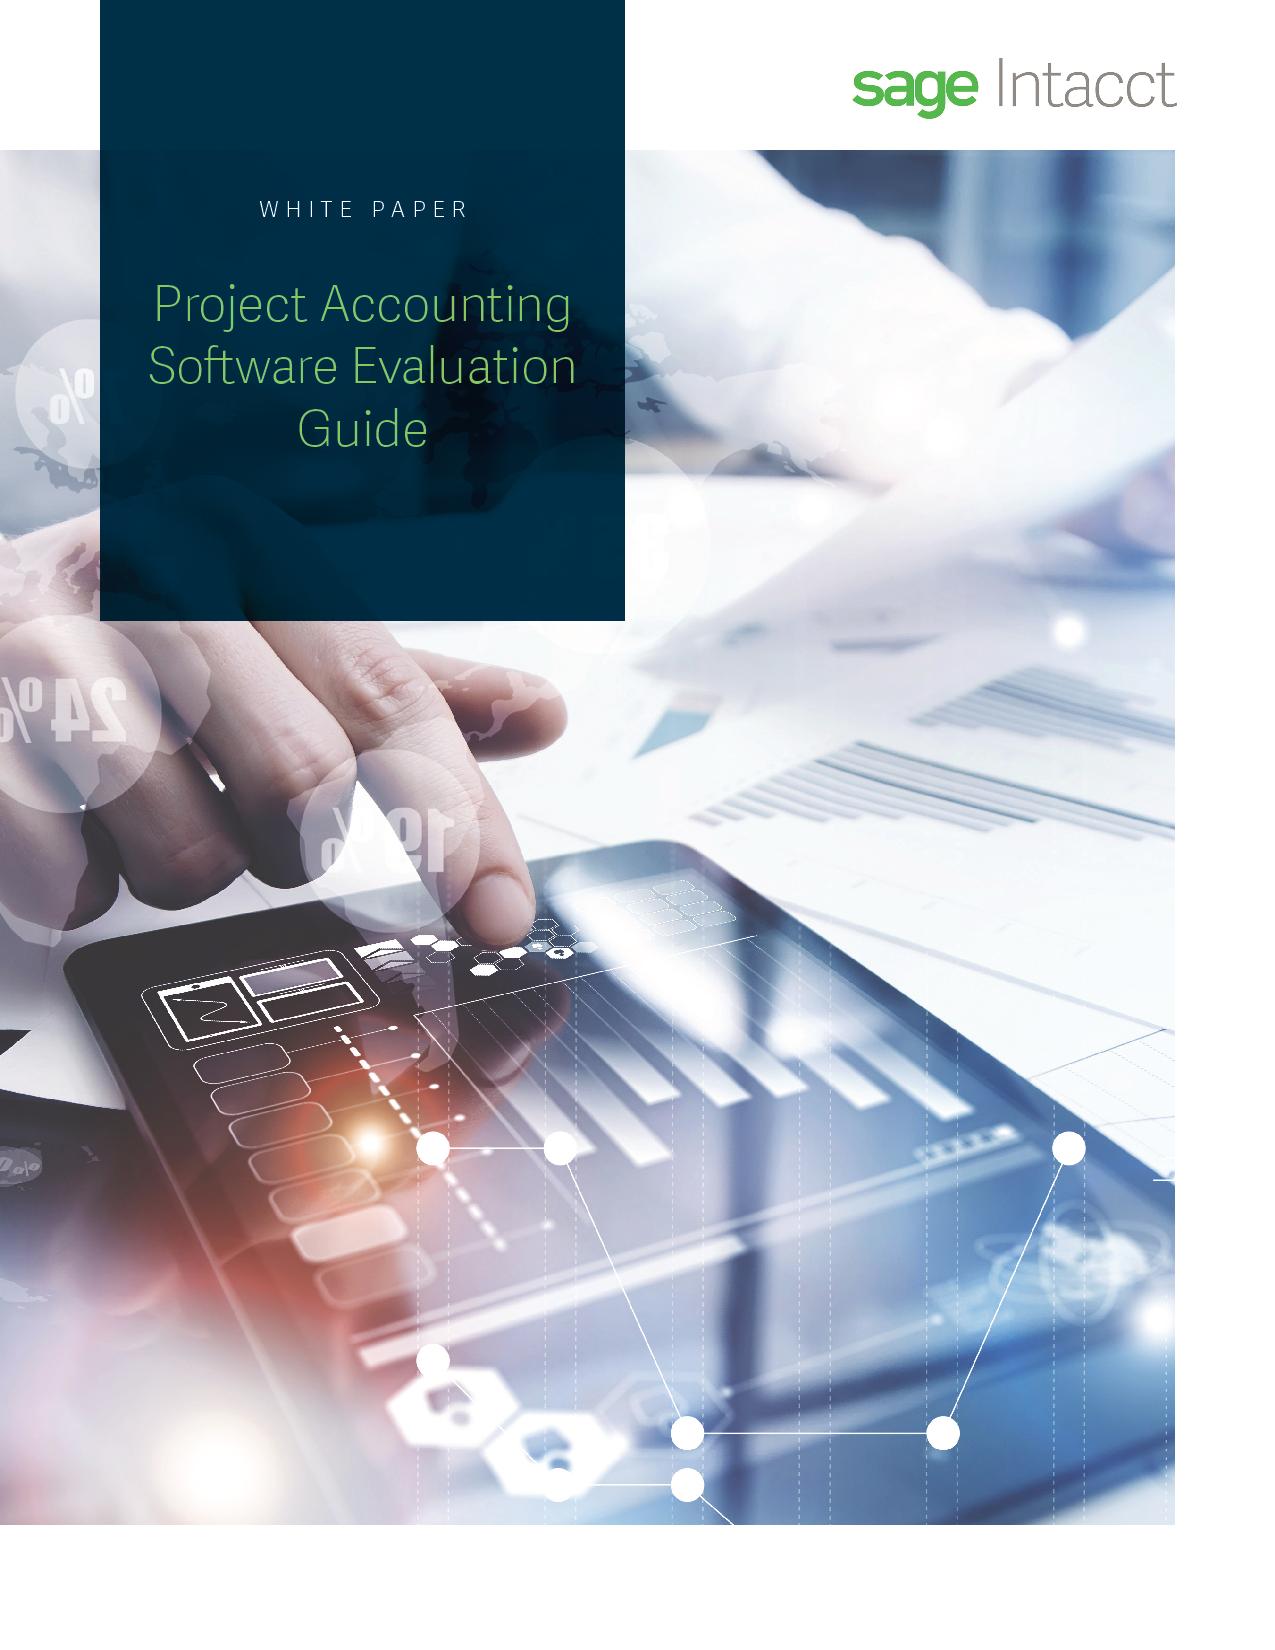 SAGE INTACCT PROJECT ACCOUNTING GUIDE